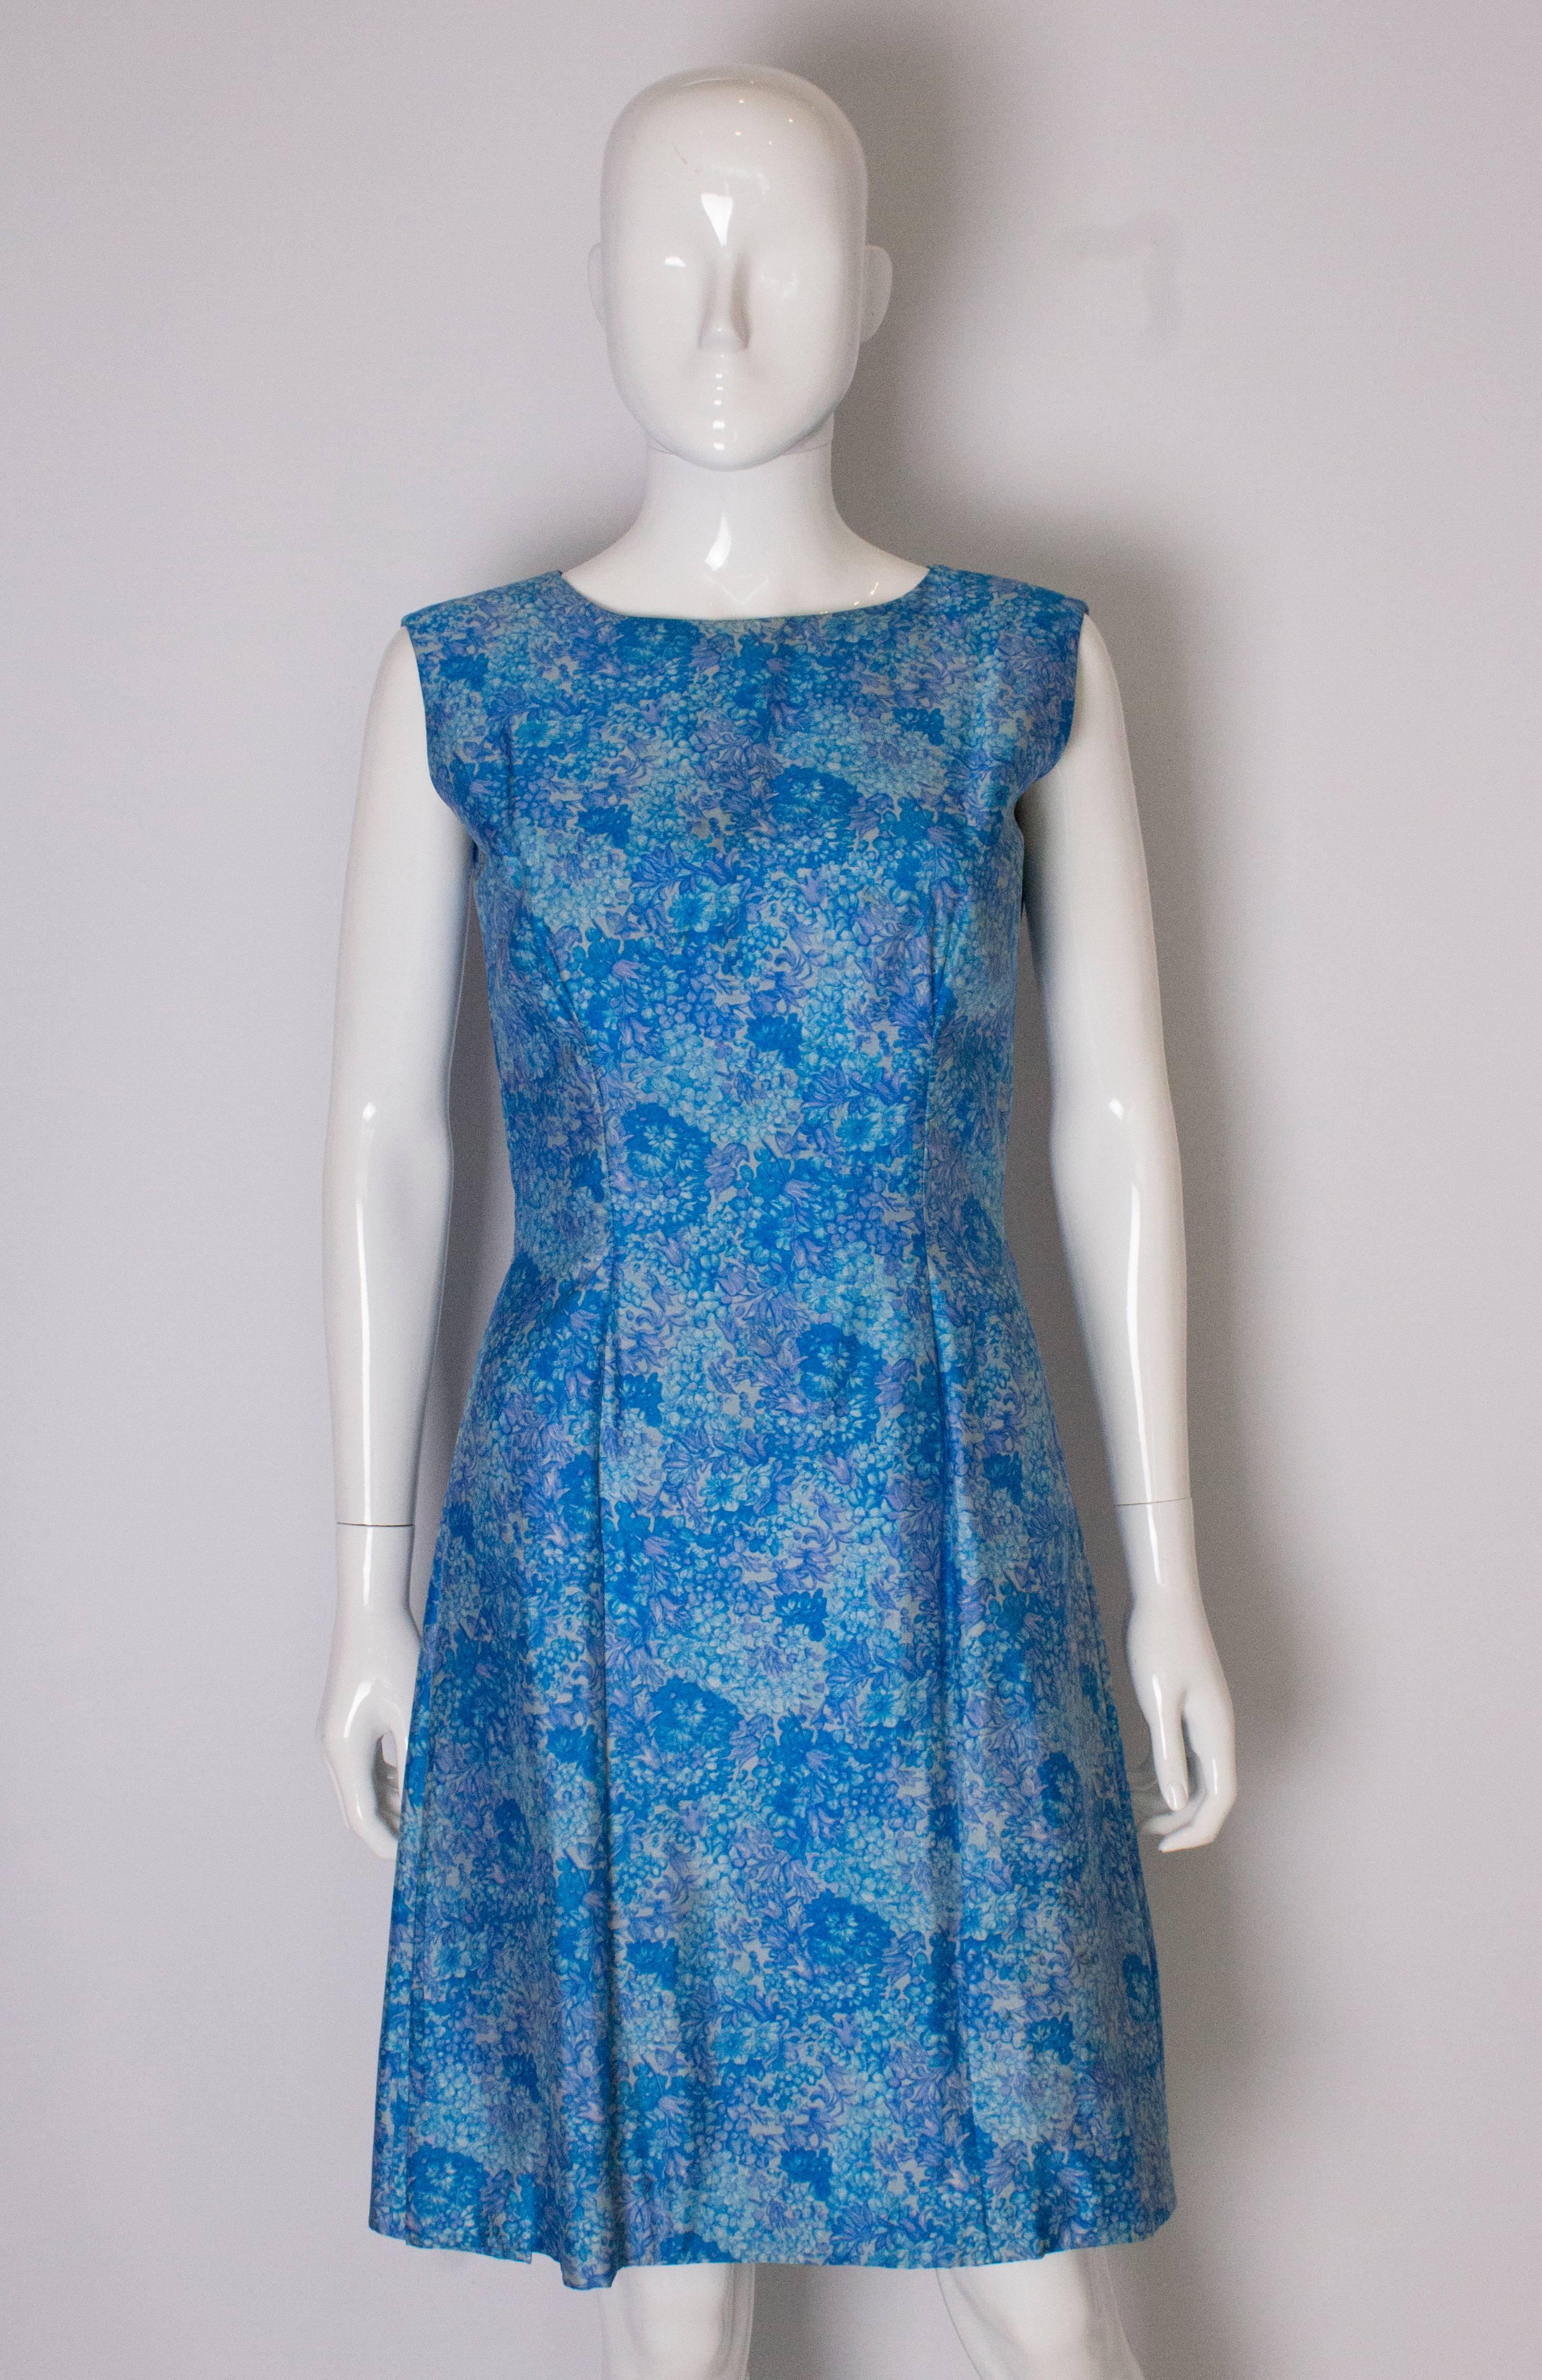 A Vintage 1960s blue printed Cocktail Dress and sheer matching Jacket 4